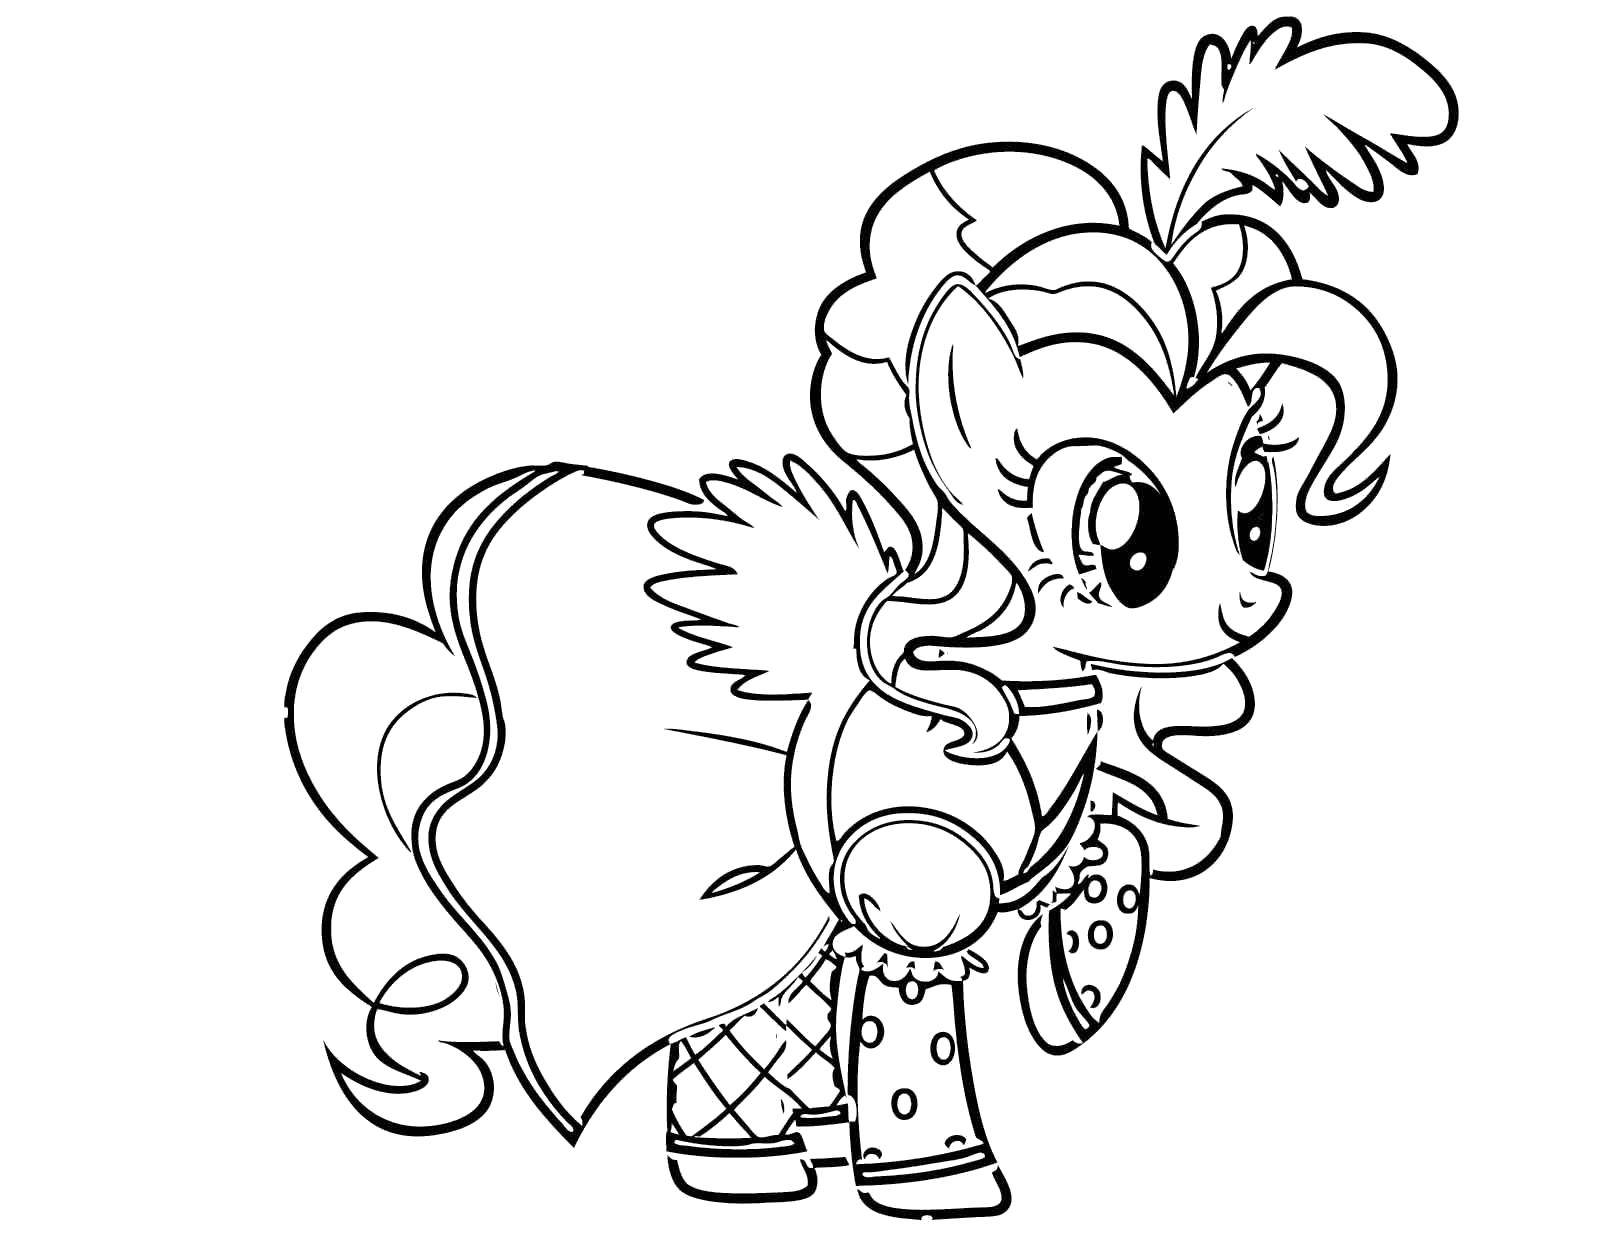 Coloring Aristocratic pony. Category Ponies. Tags:  Pony, My little pony .